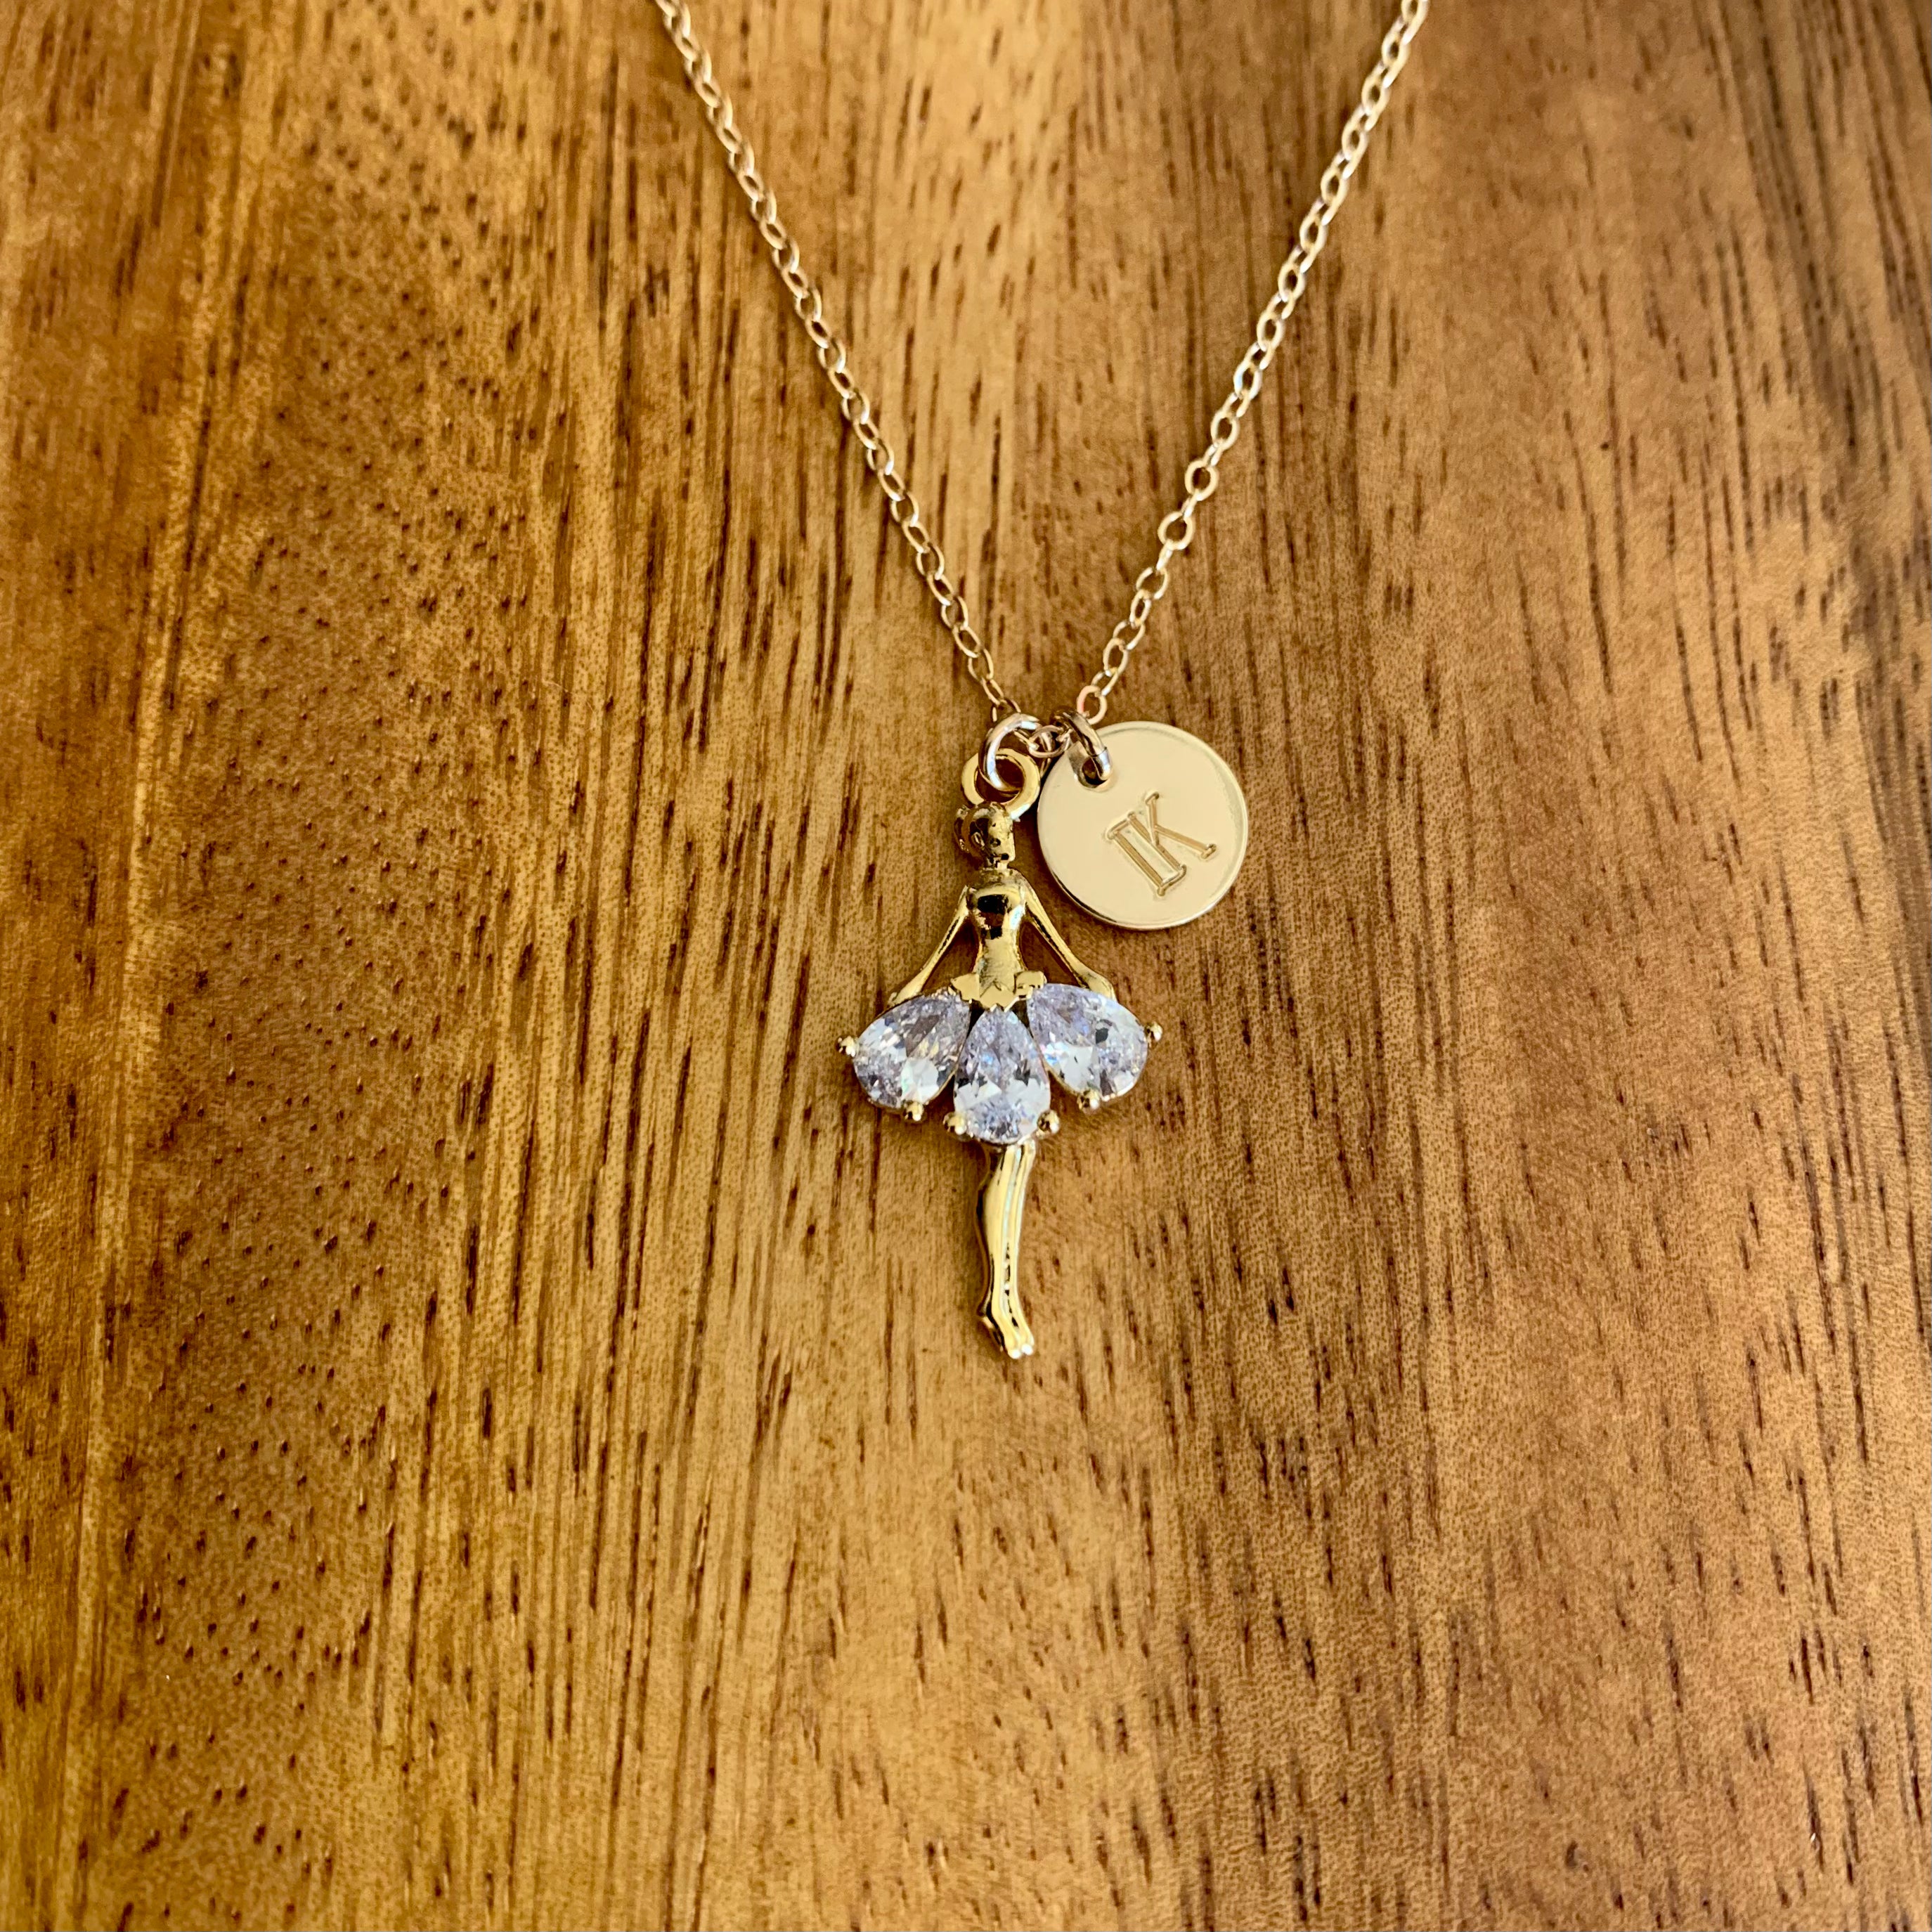 Standing Ballerina necklace with initial charm - gold